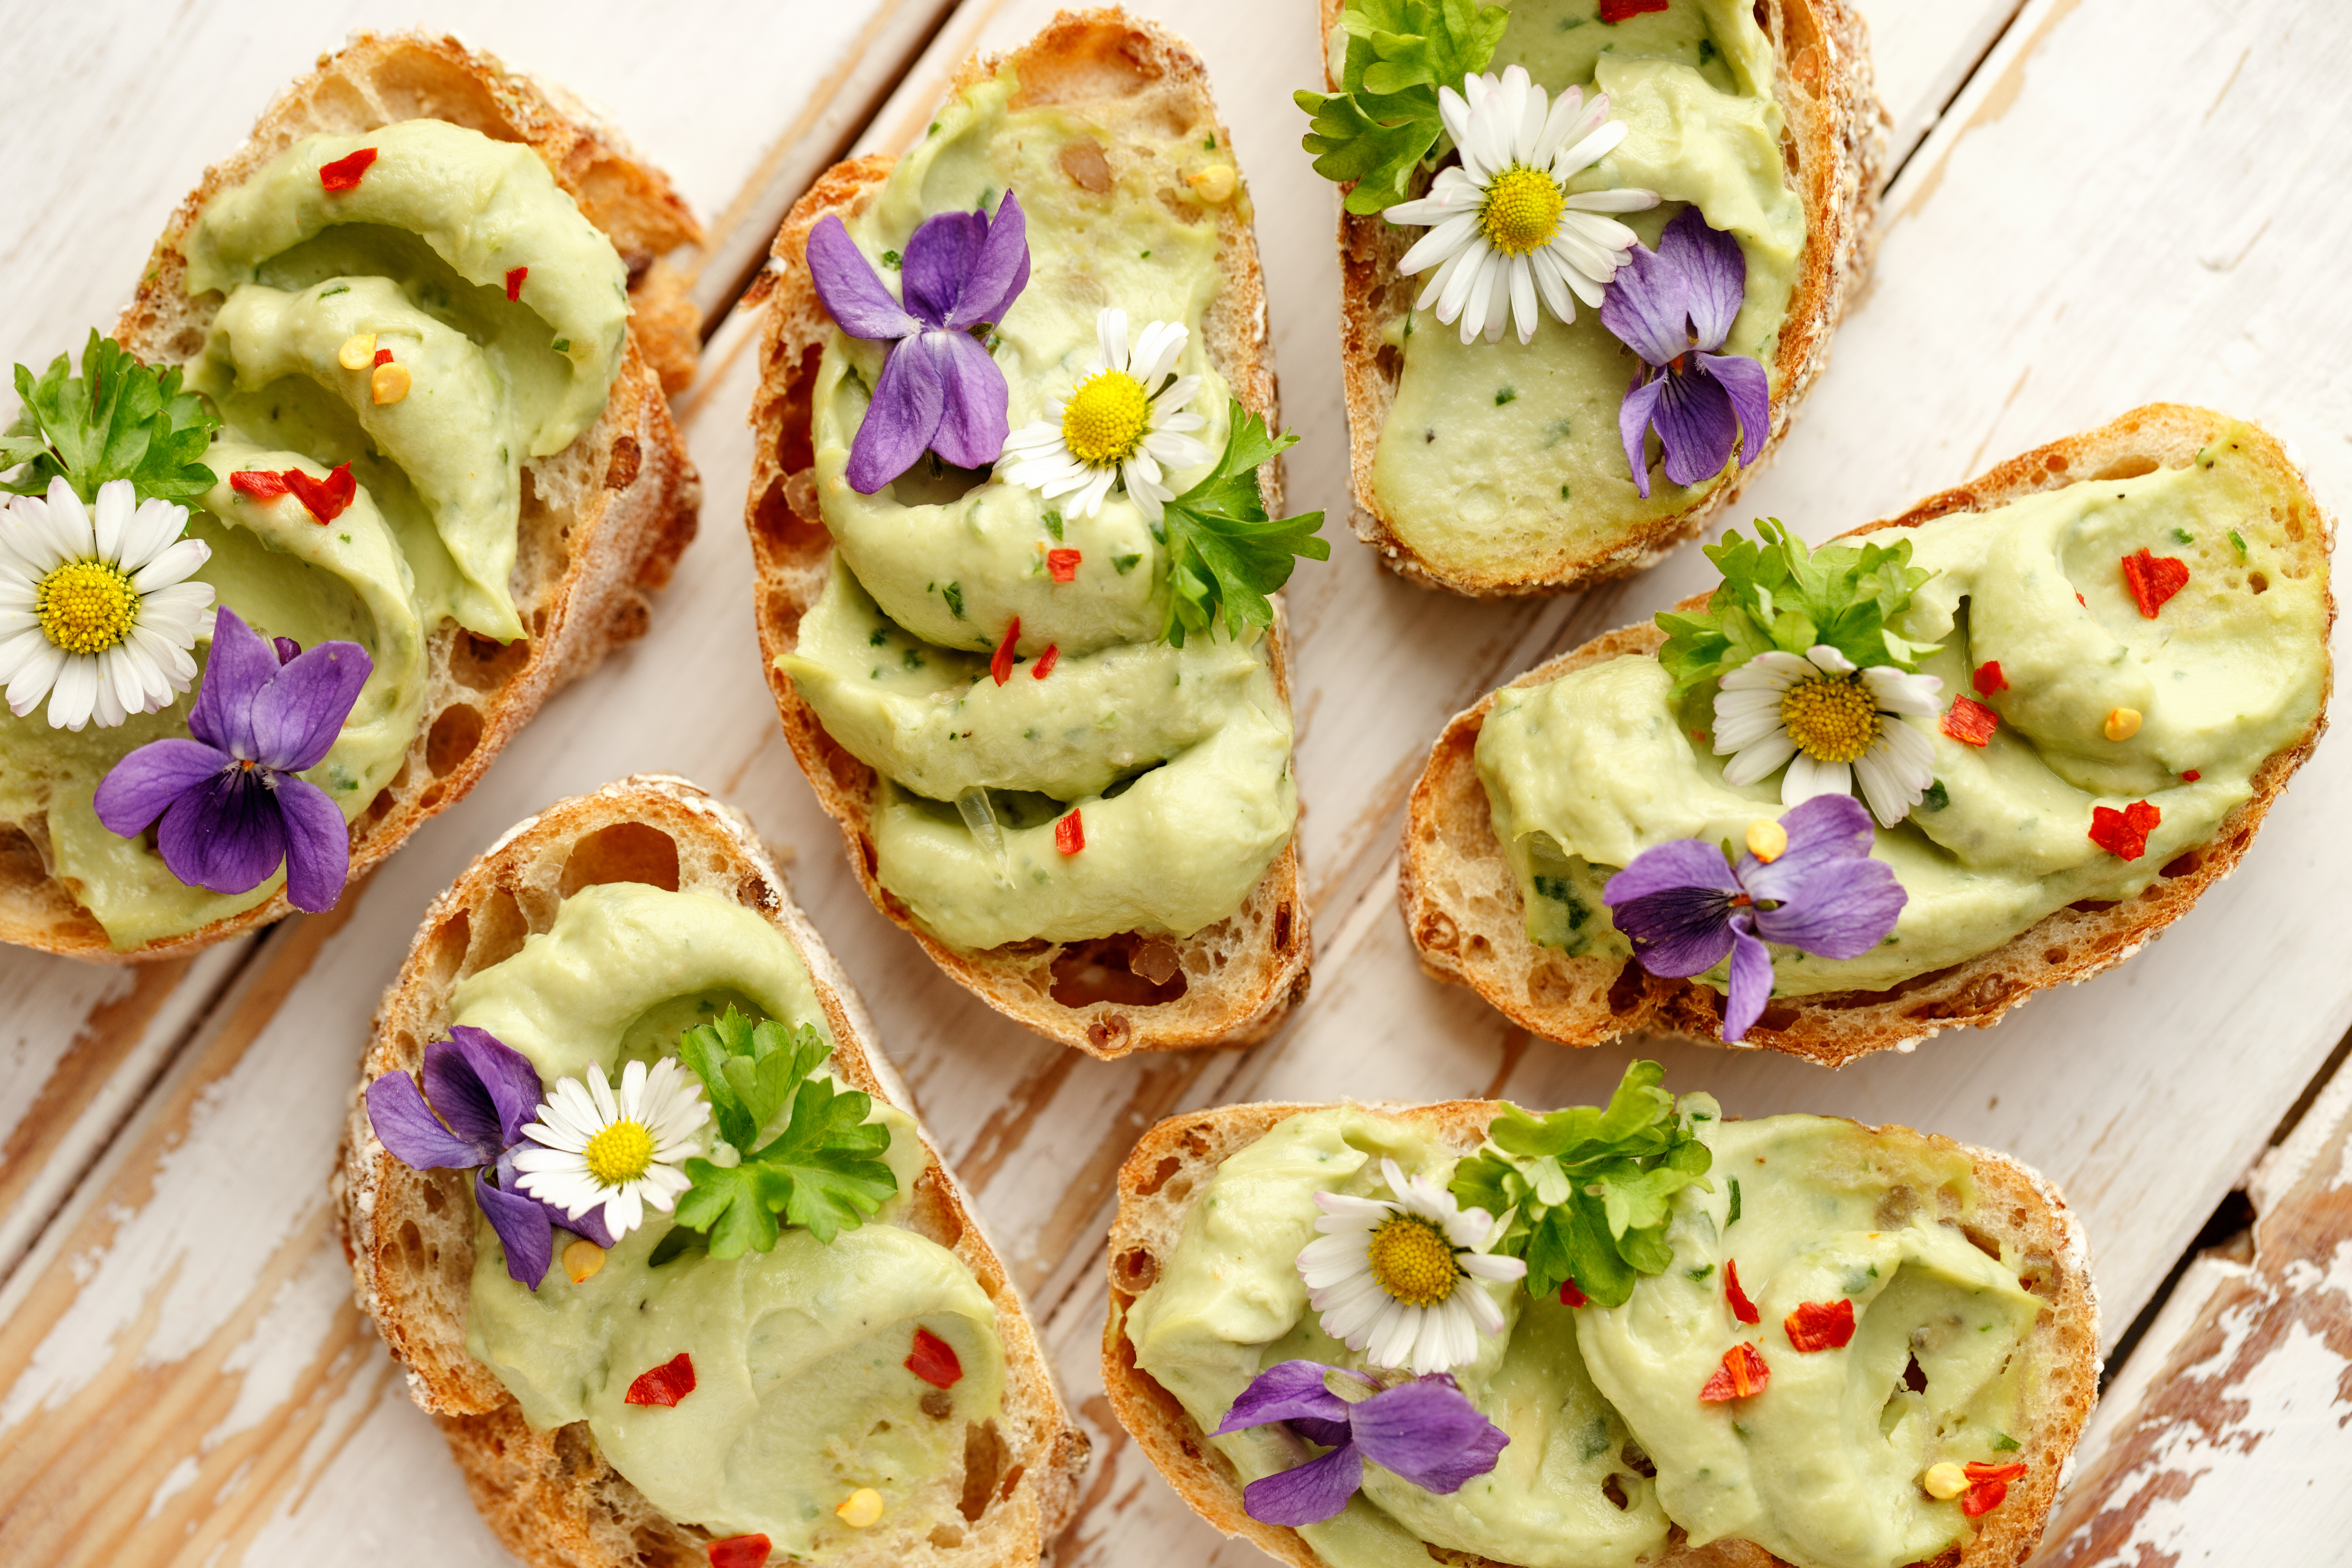 Top off artisan toast with edible flowers.